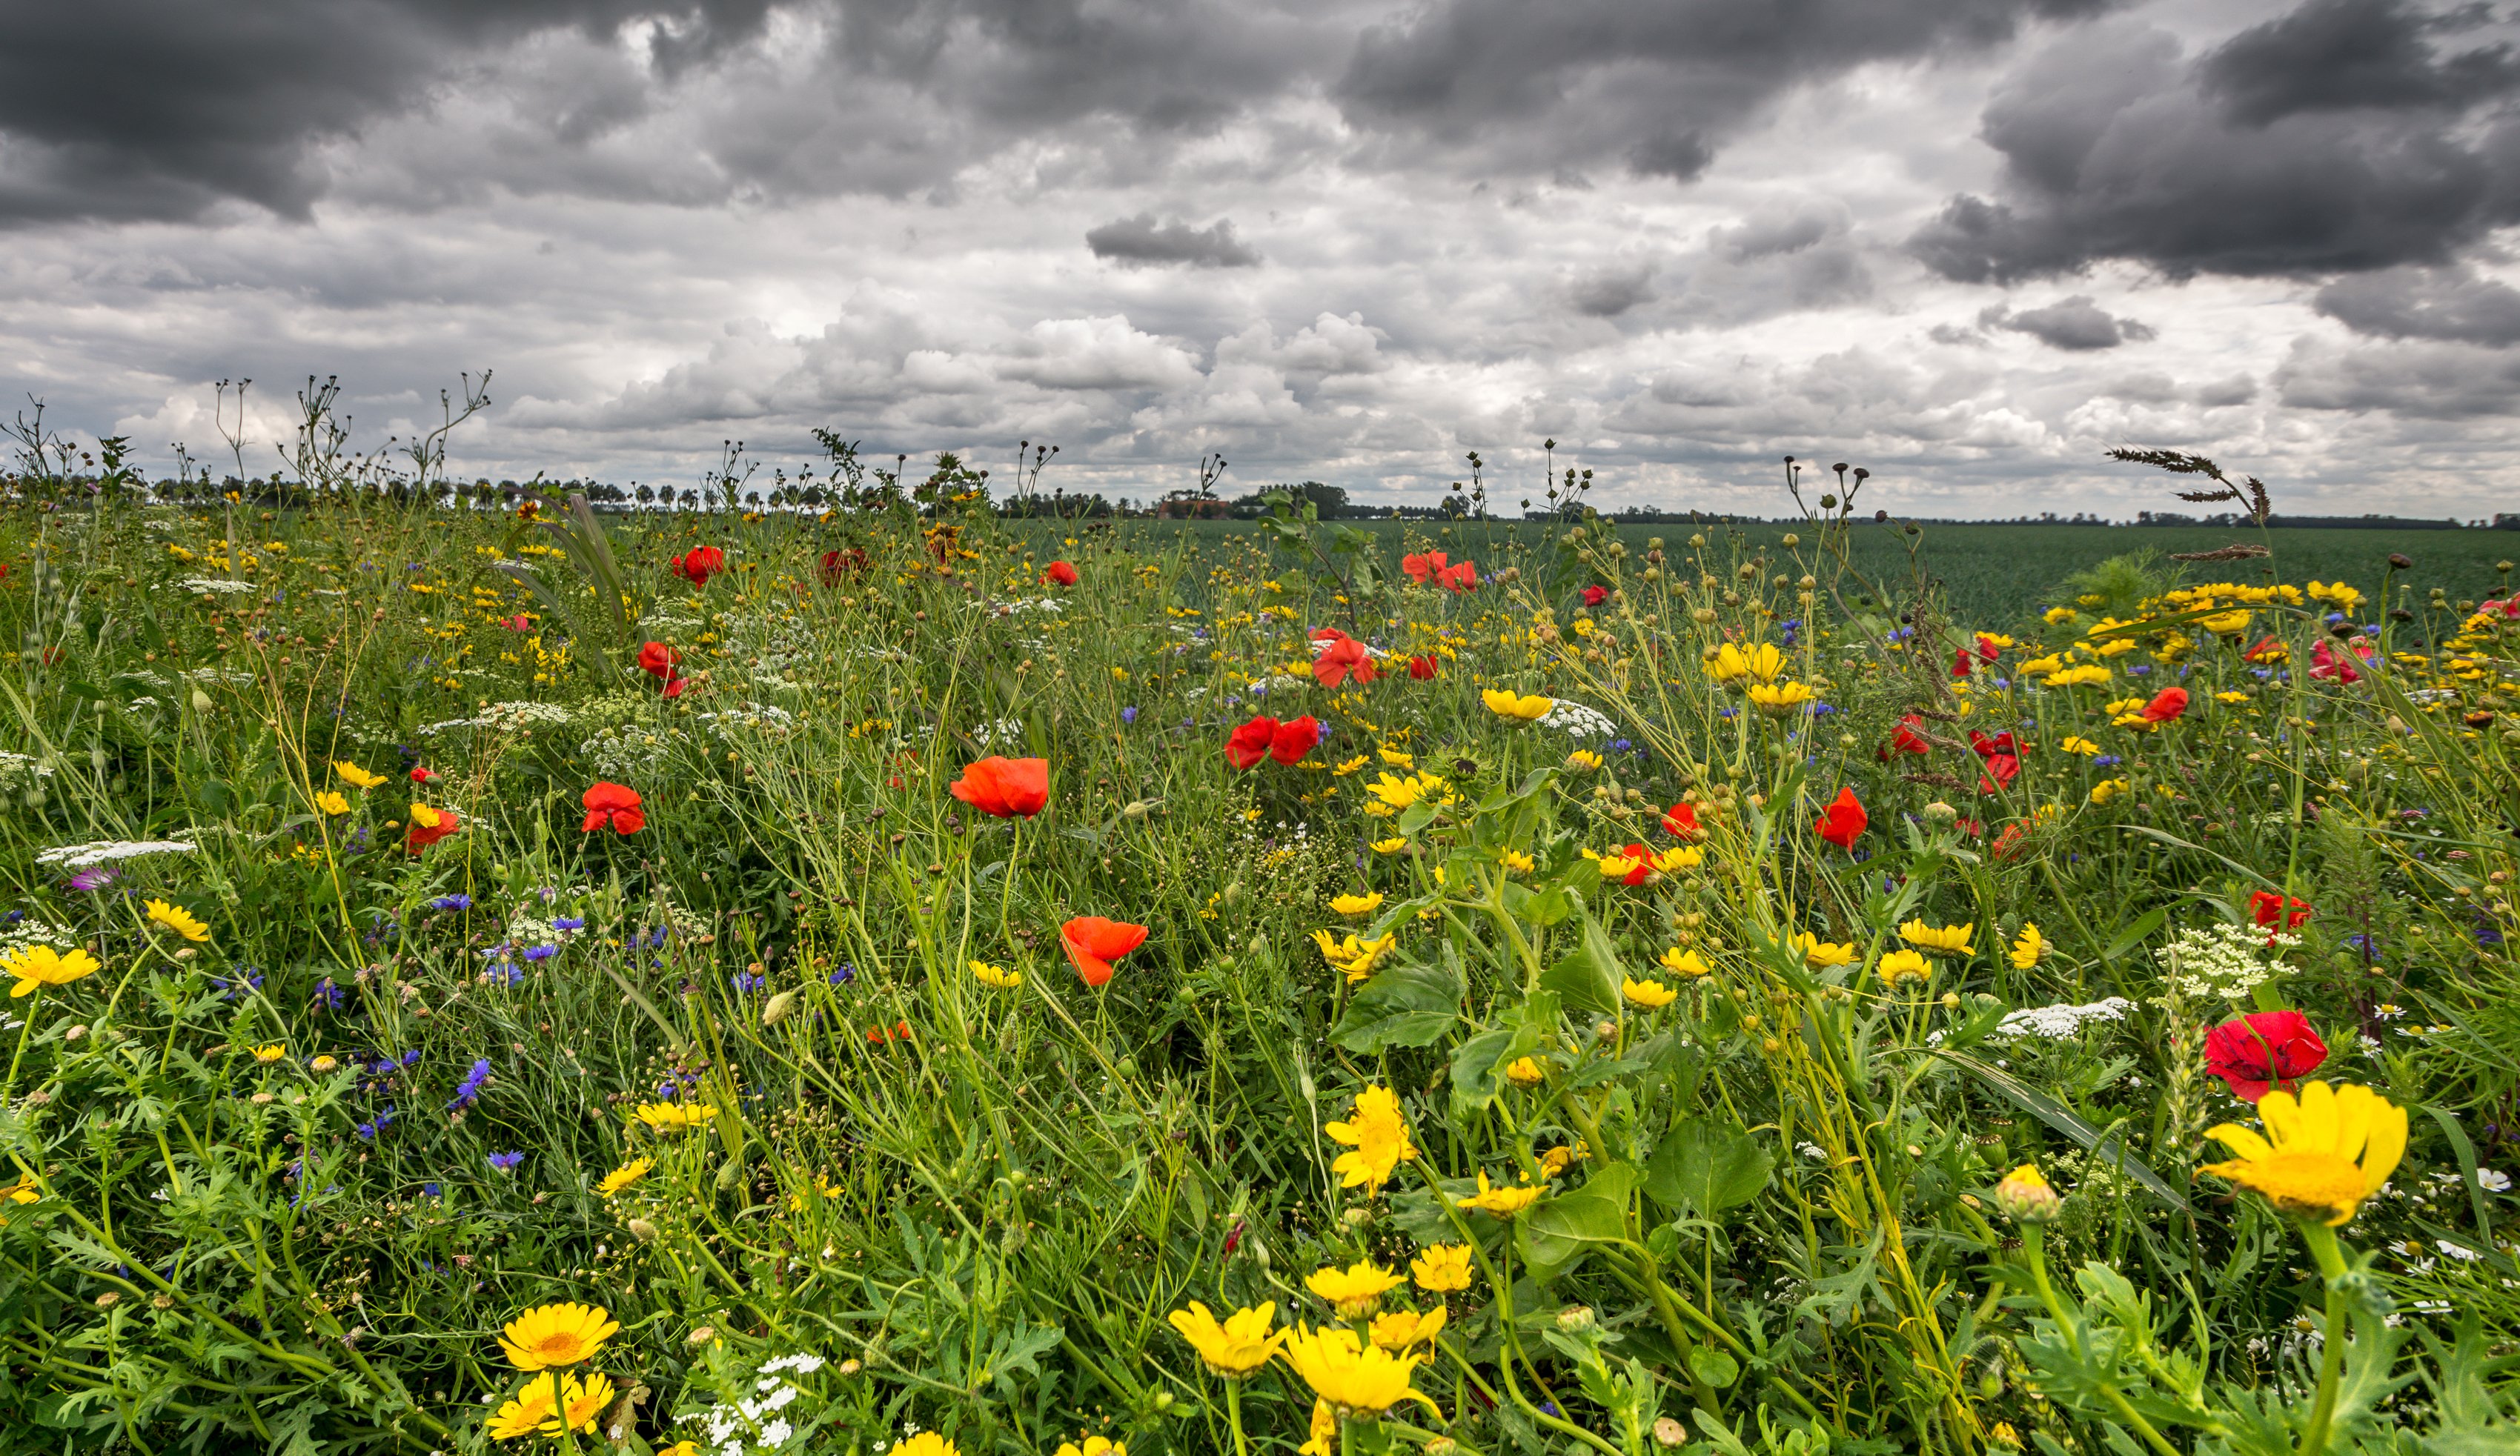 scenery, Fields, Poppies, Ranunculus, Clouds, Nature Wallpaper